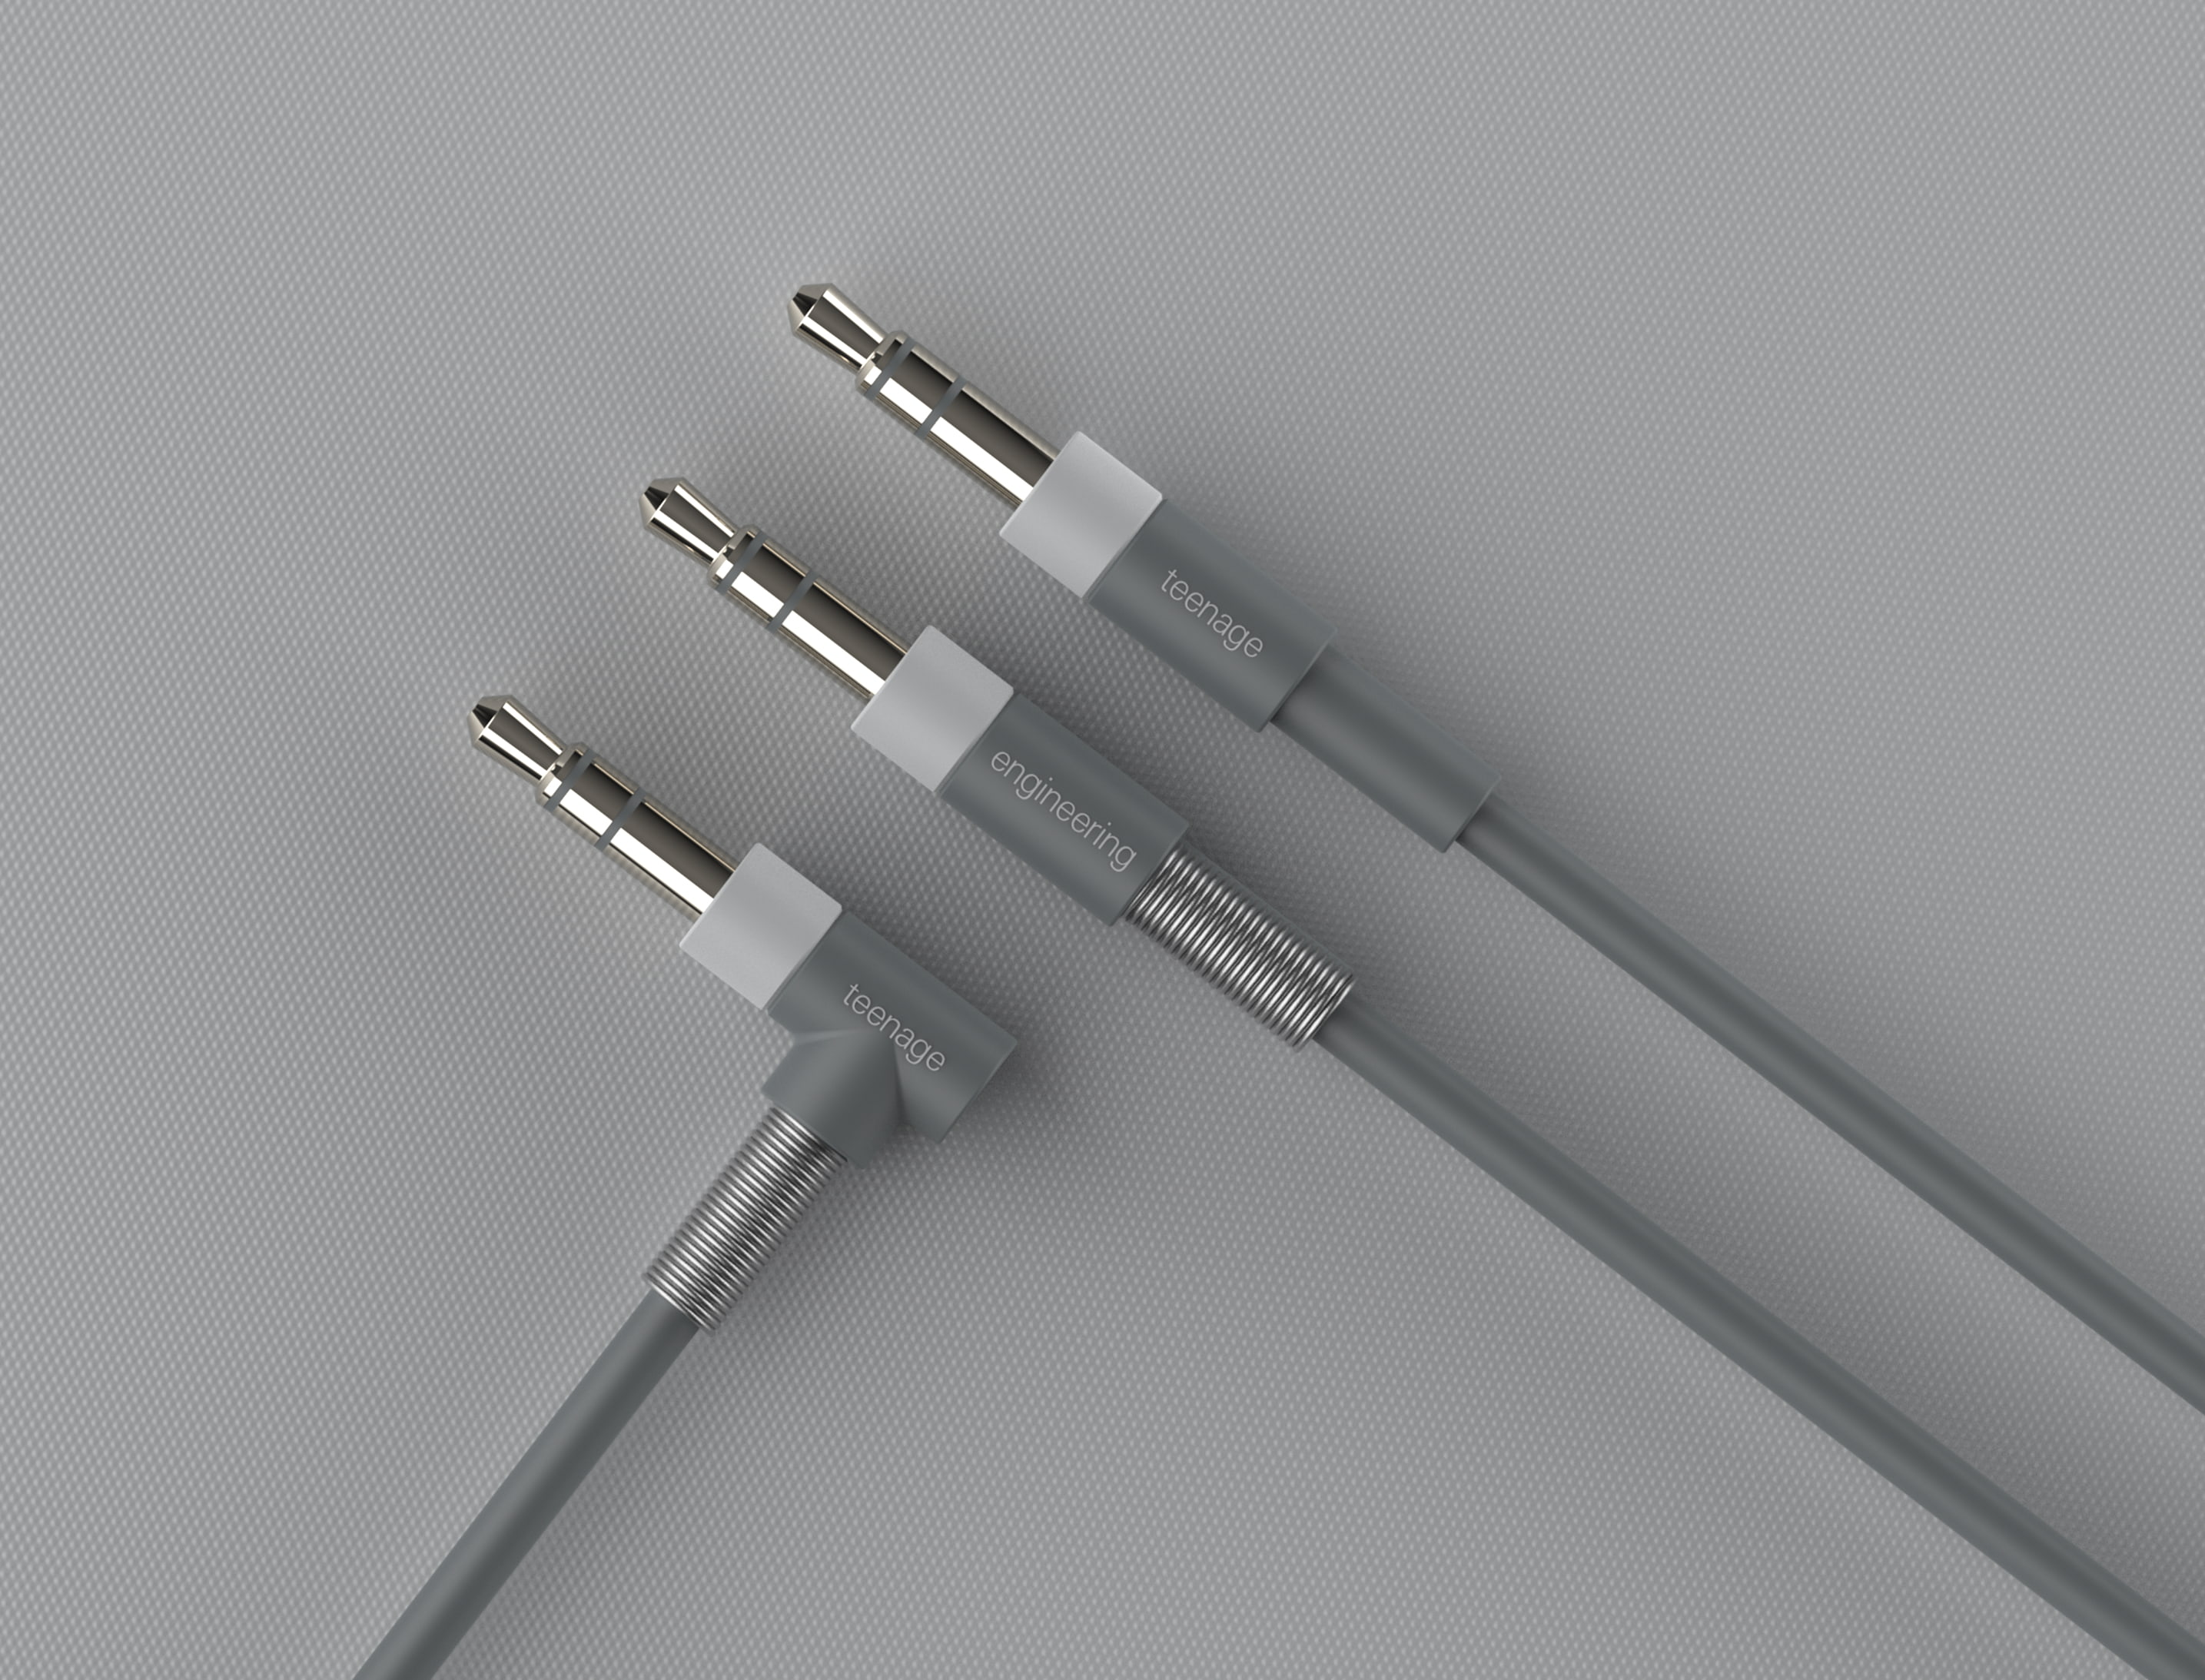 3.5mm unreleased prototype cables series